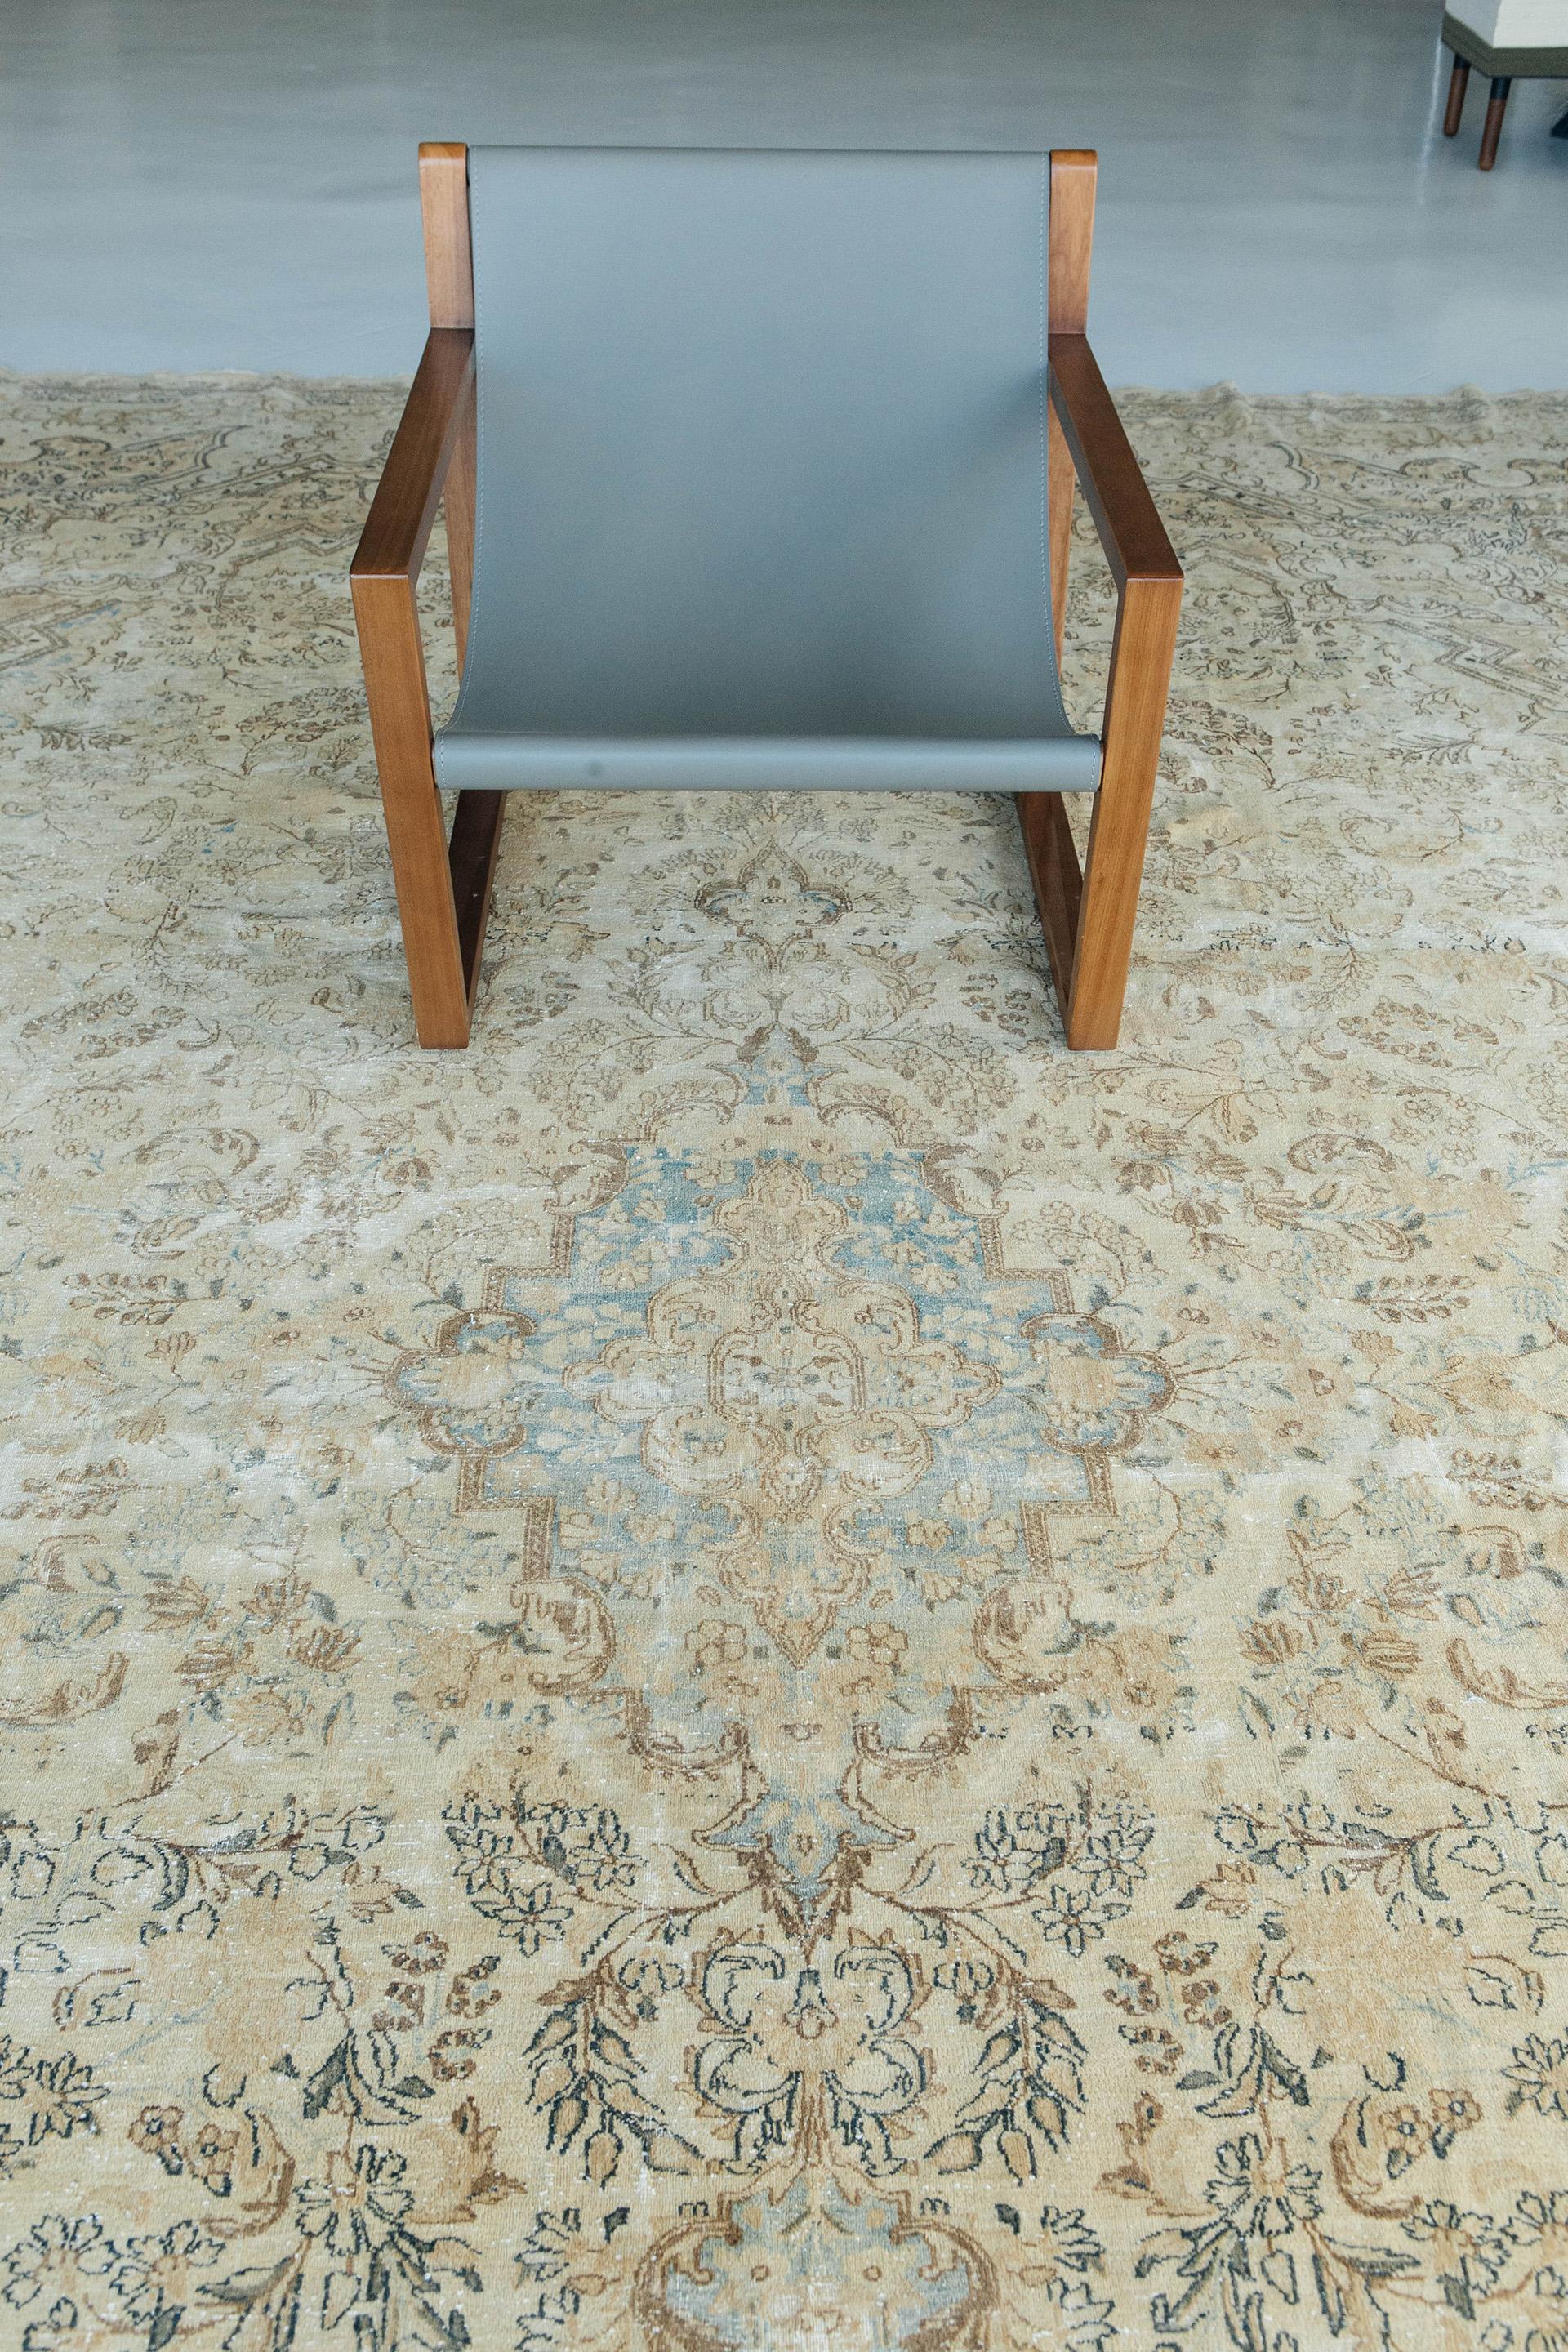 Hand-Knotted Antique Persian Kerman Rug